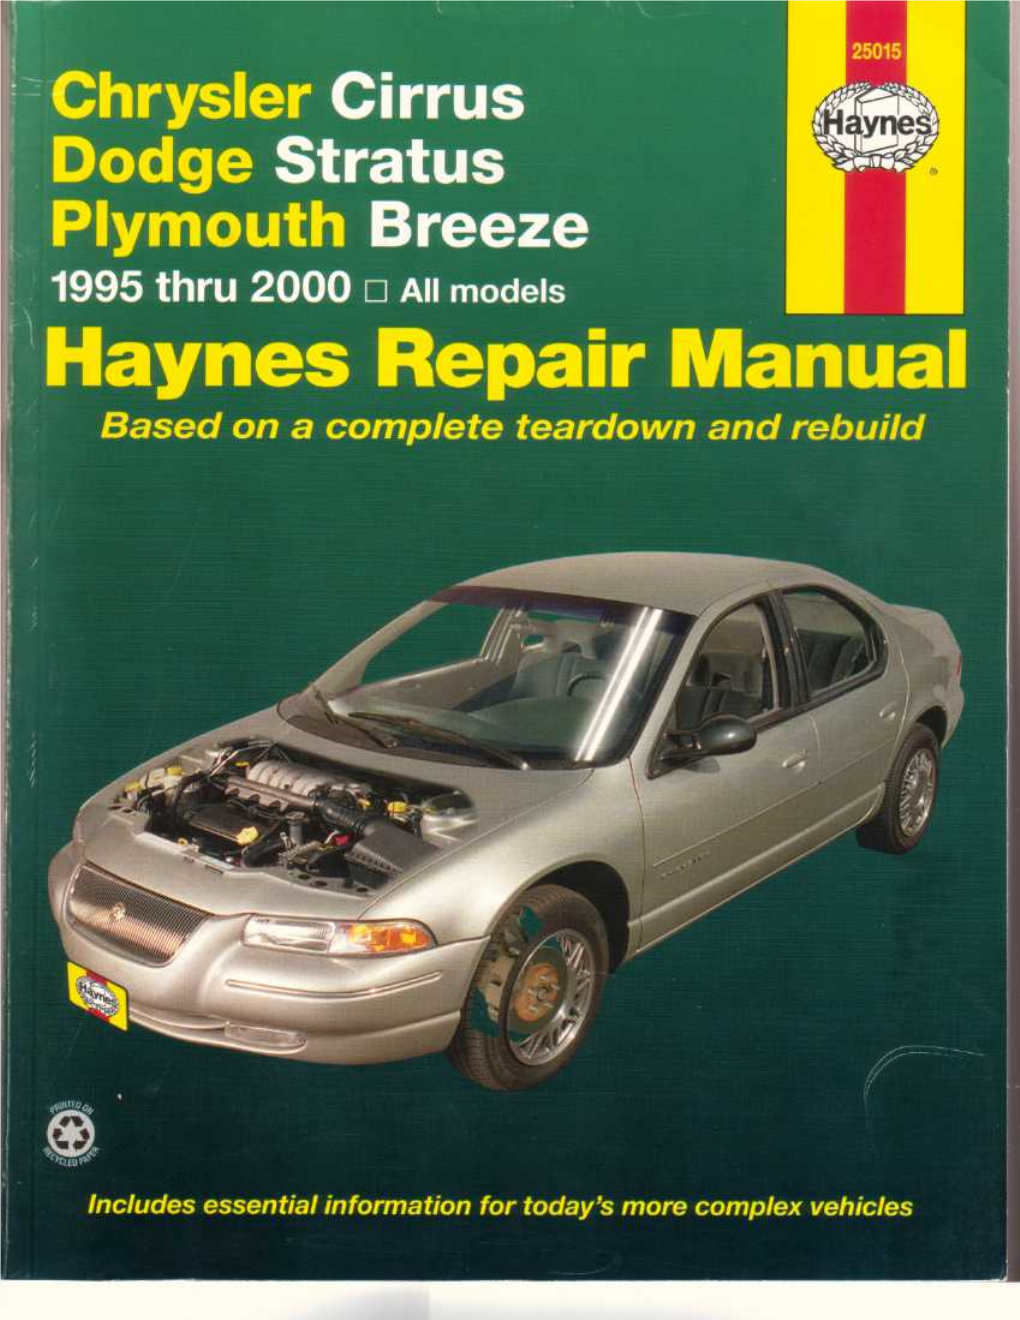 Chrysler Cirrus Dodge Stratus Plymouth Breeze Automotive Repair Manual by Marc M Scribner and John H Haynes Member of the Guild of Motoring Writers